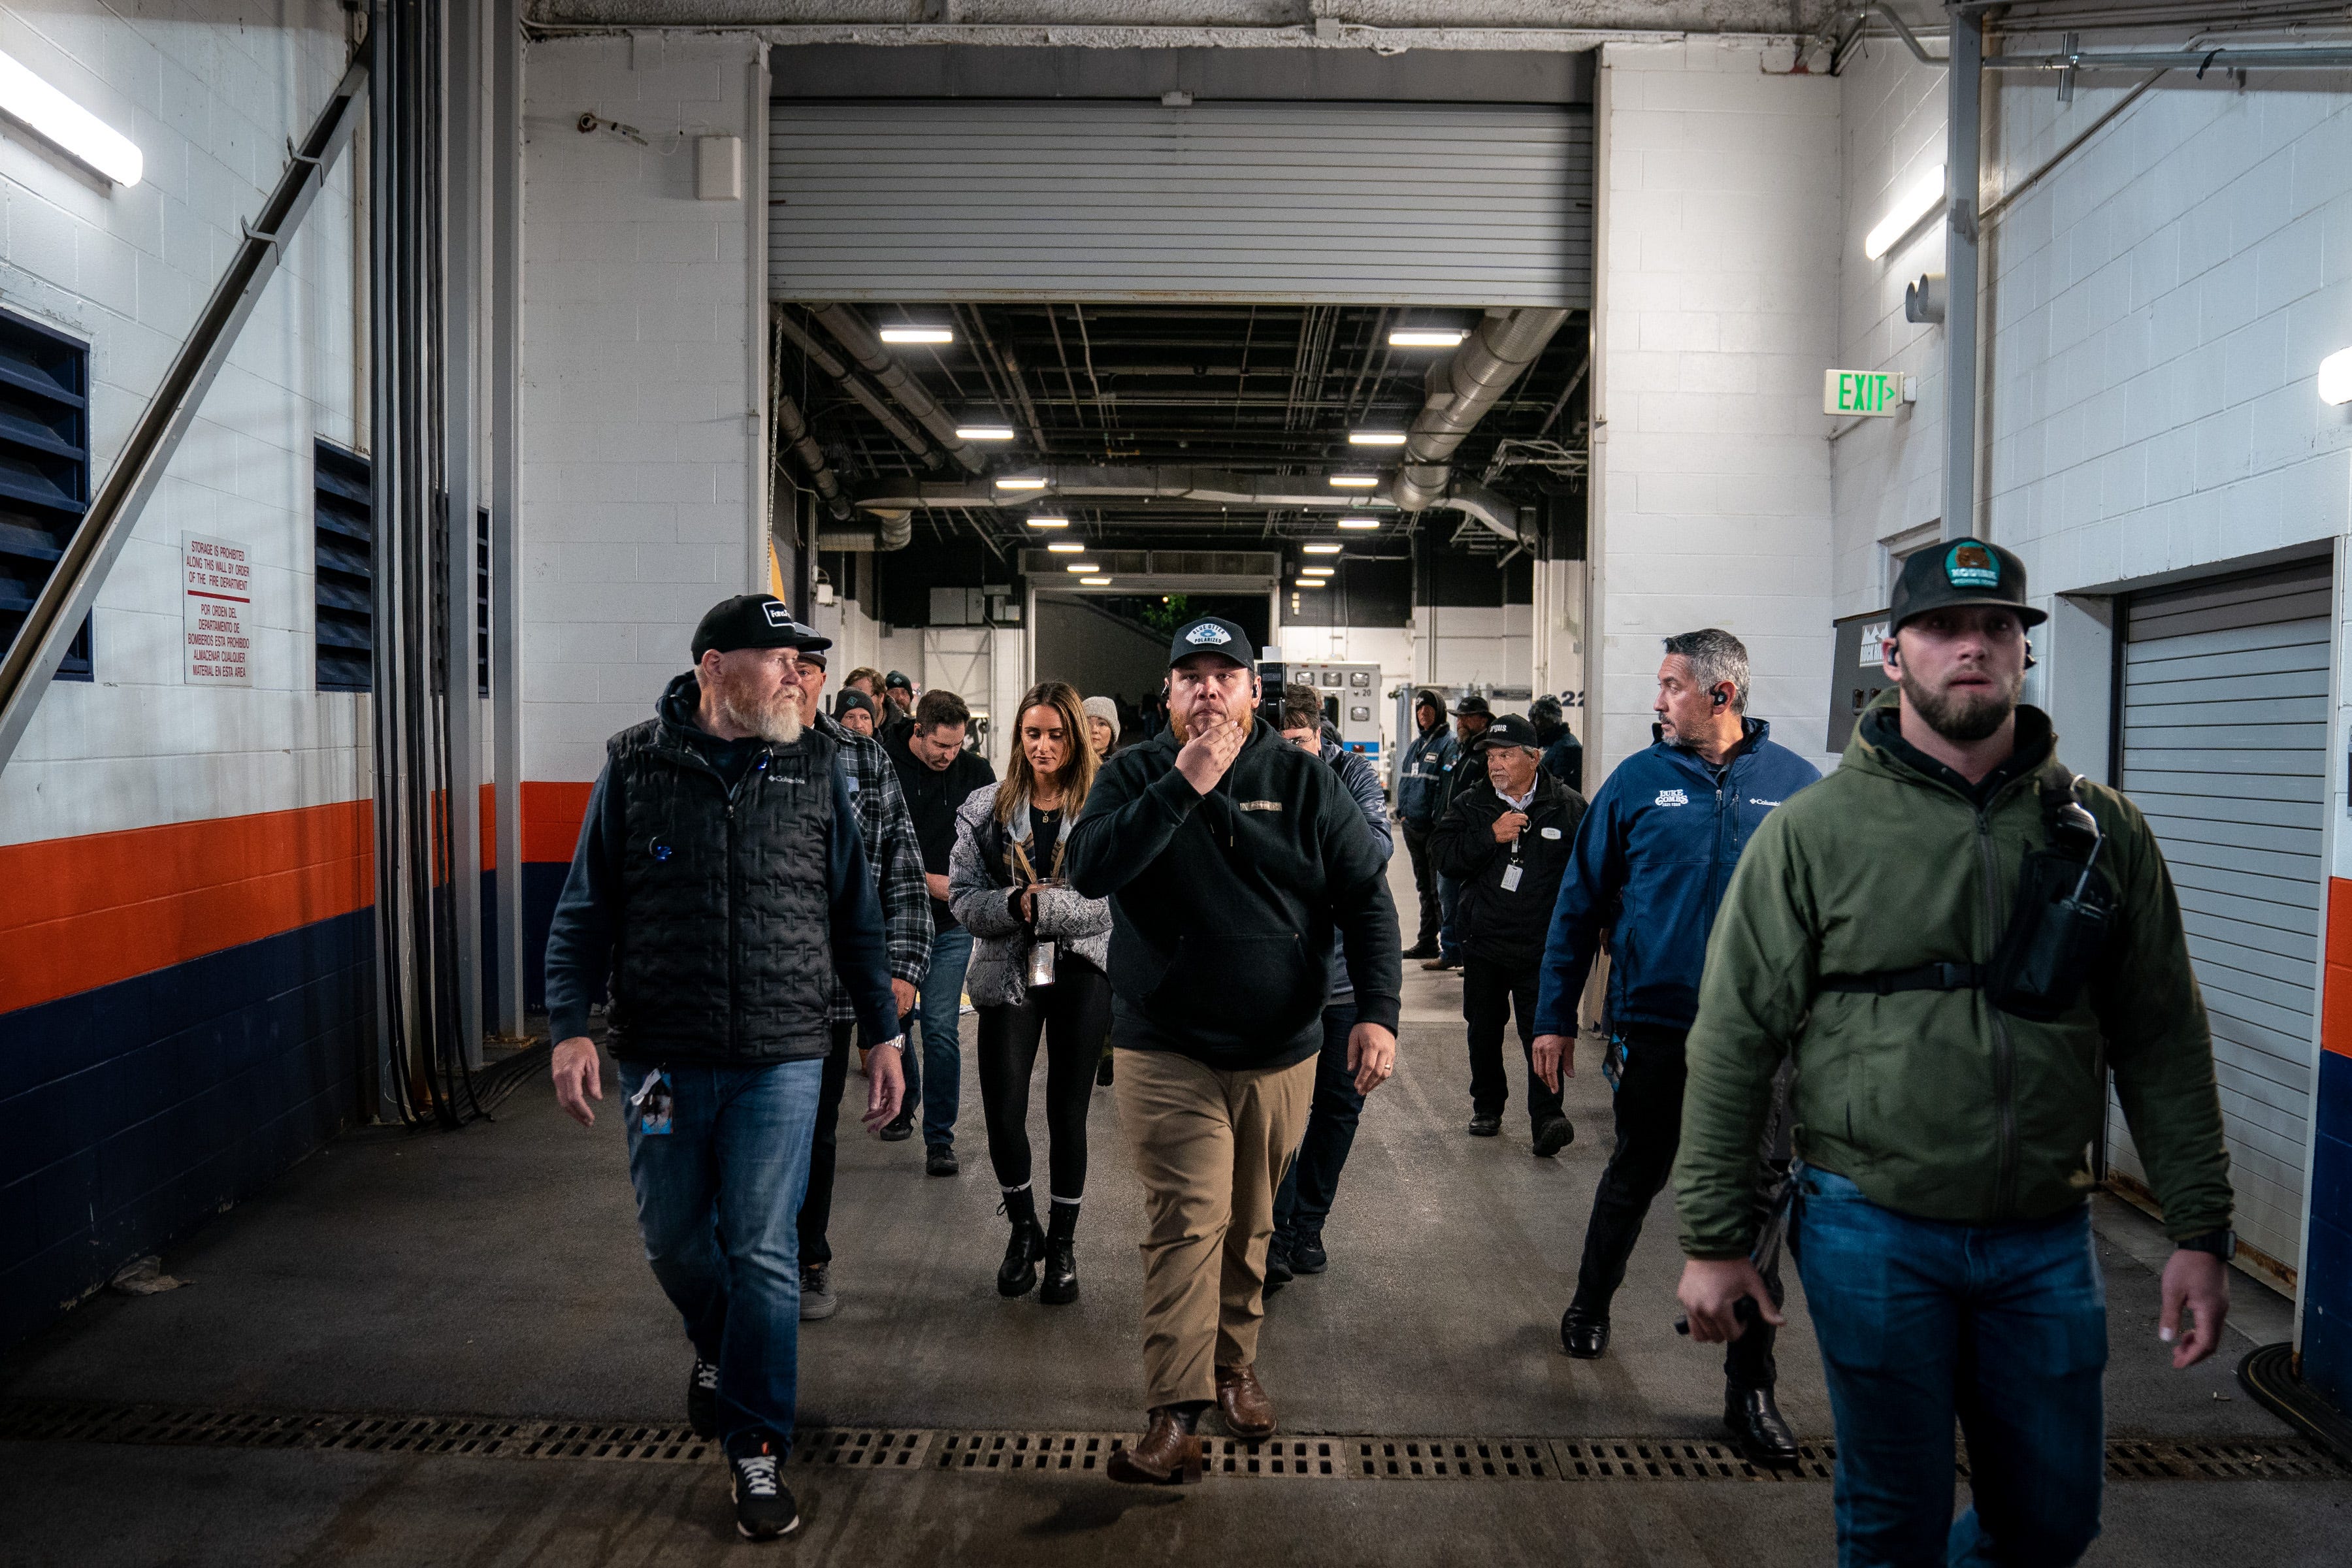 Luke Combs heads to the stage before performing at Empower Field at Mile High in Denver, Colo., Saturday, May 21, 2022. The show kicked off Combs’ first-ever headlining stadium tour.